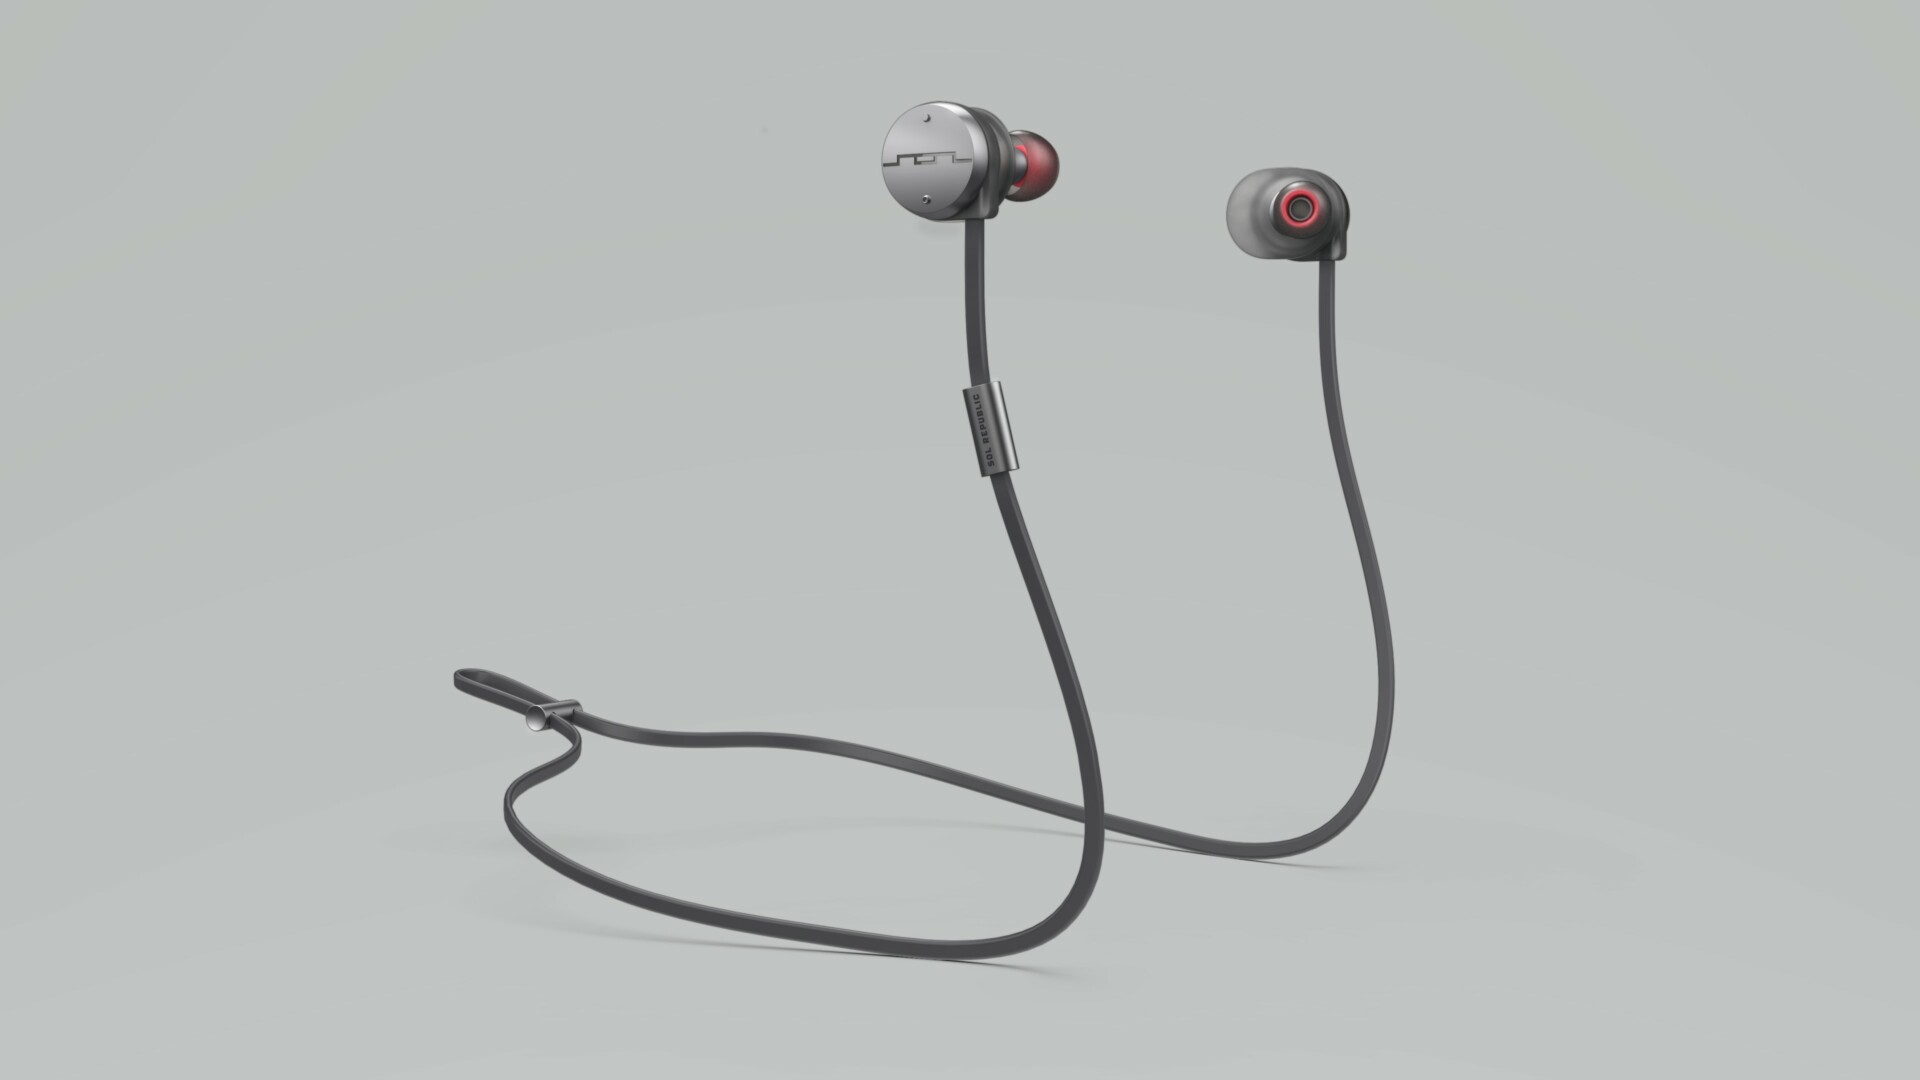 Sol Republic Freestyle wireless earbuds on gray background.